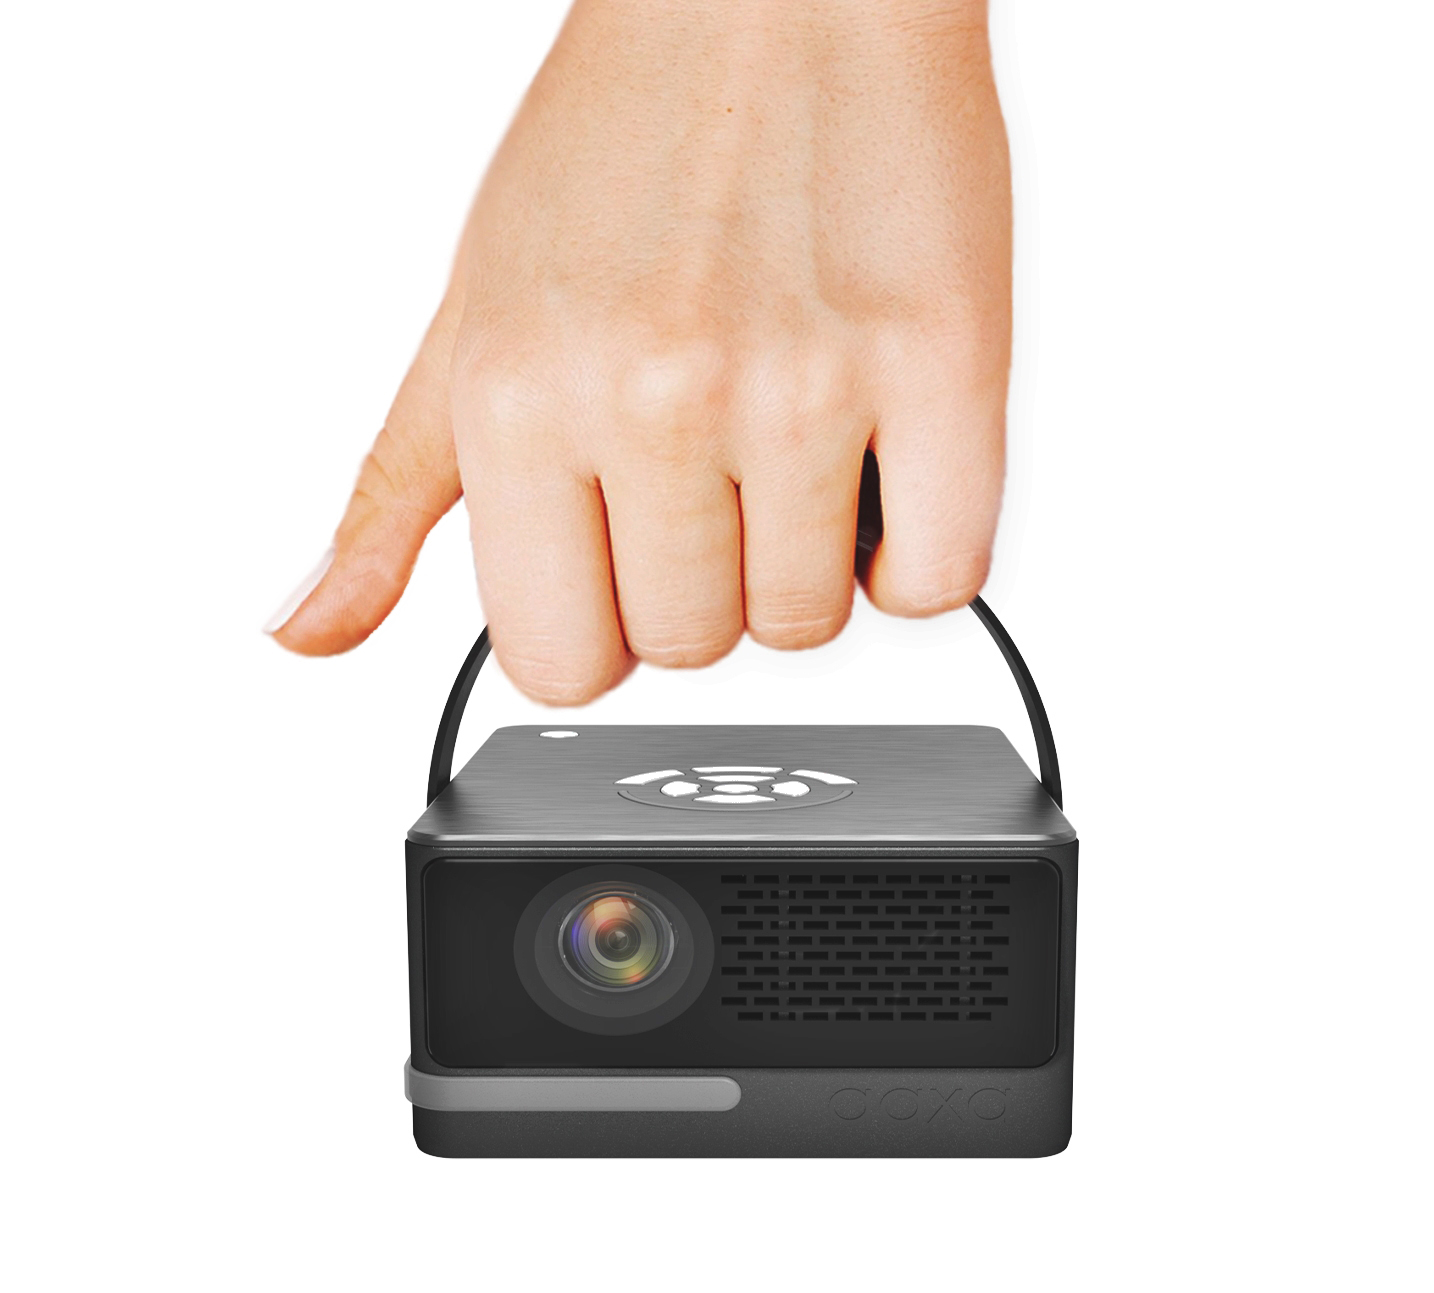 P6 Ultimate HD Smart Projector - Hand Picture size reference